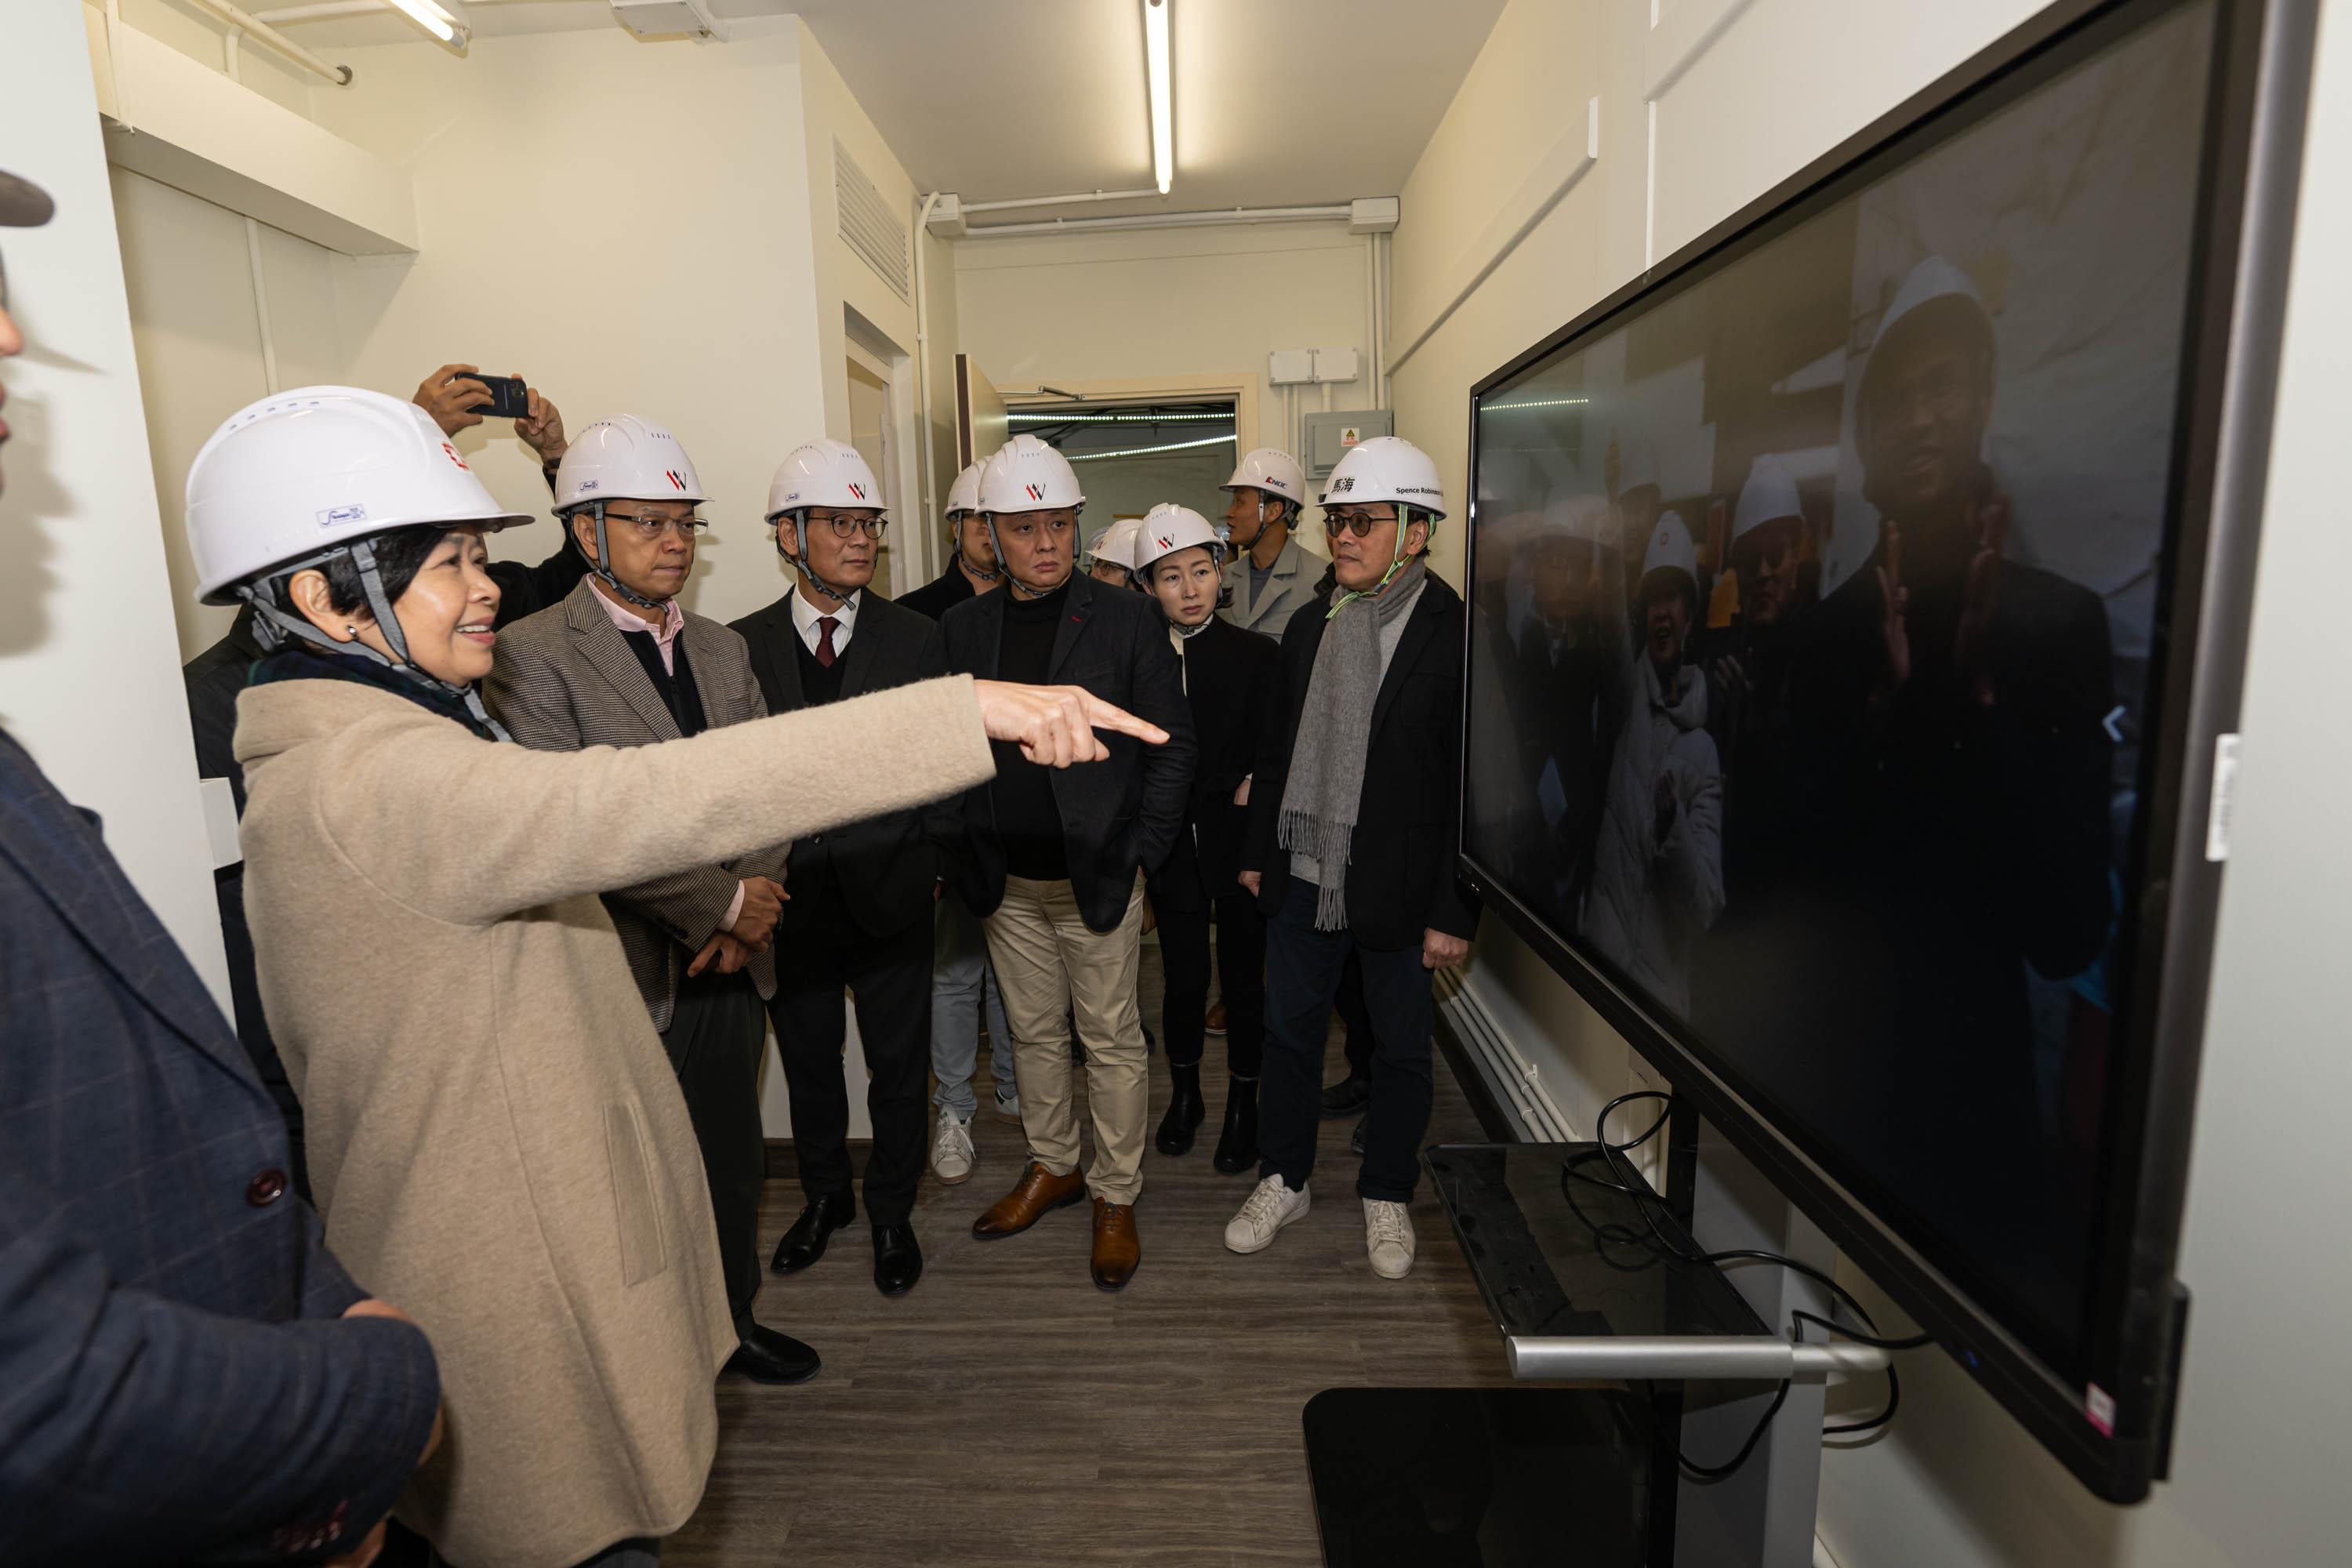 The Legislative Council (LegCo) Public Works Subcommittee visited the Choi Hing Road transitional housing project in Ngau Tau Kok today (January 29). Photo shows LegCo Members touring a reused MiC mock-up unit.
